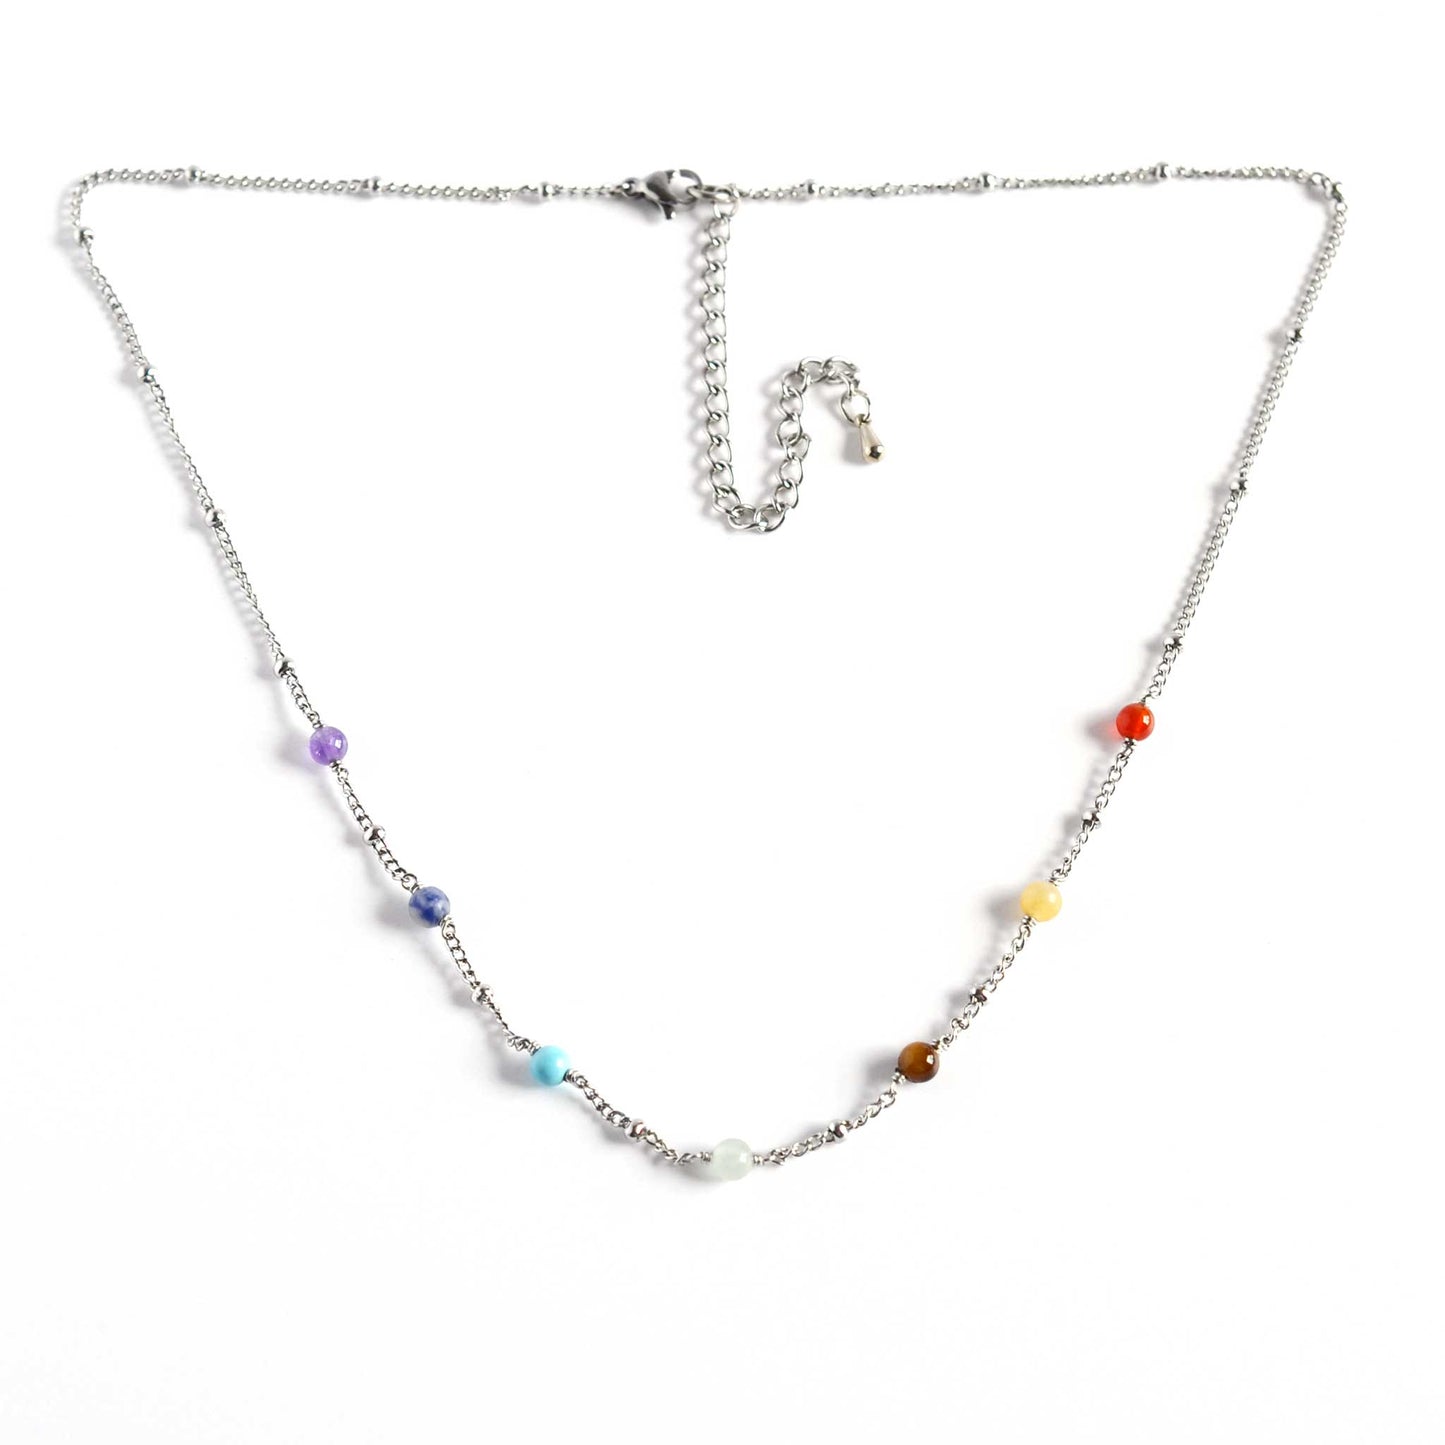 Chakra necklace with seven gemstone beads on adjustable stainless steel neck chain